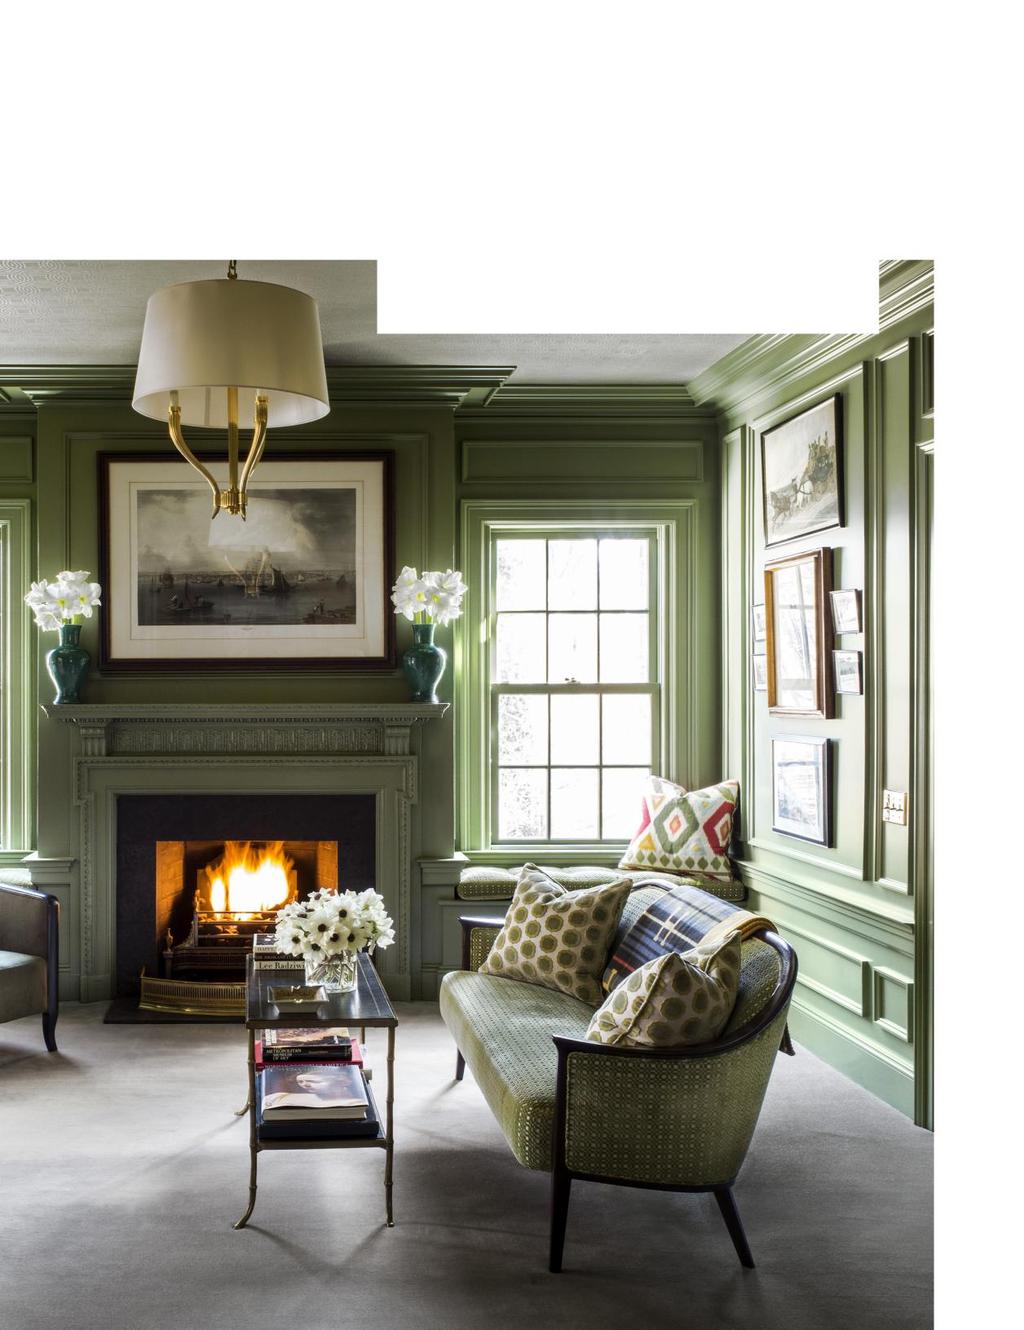 G After an addition nearly doubles the footprint of a 1915 Colonial Revival in New Jersey, designer Michael Maher steps in to skillfully unite past and present.